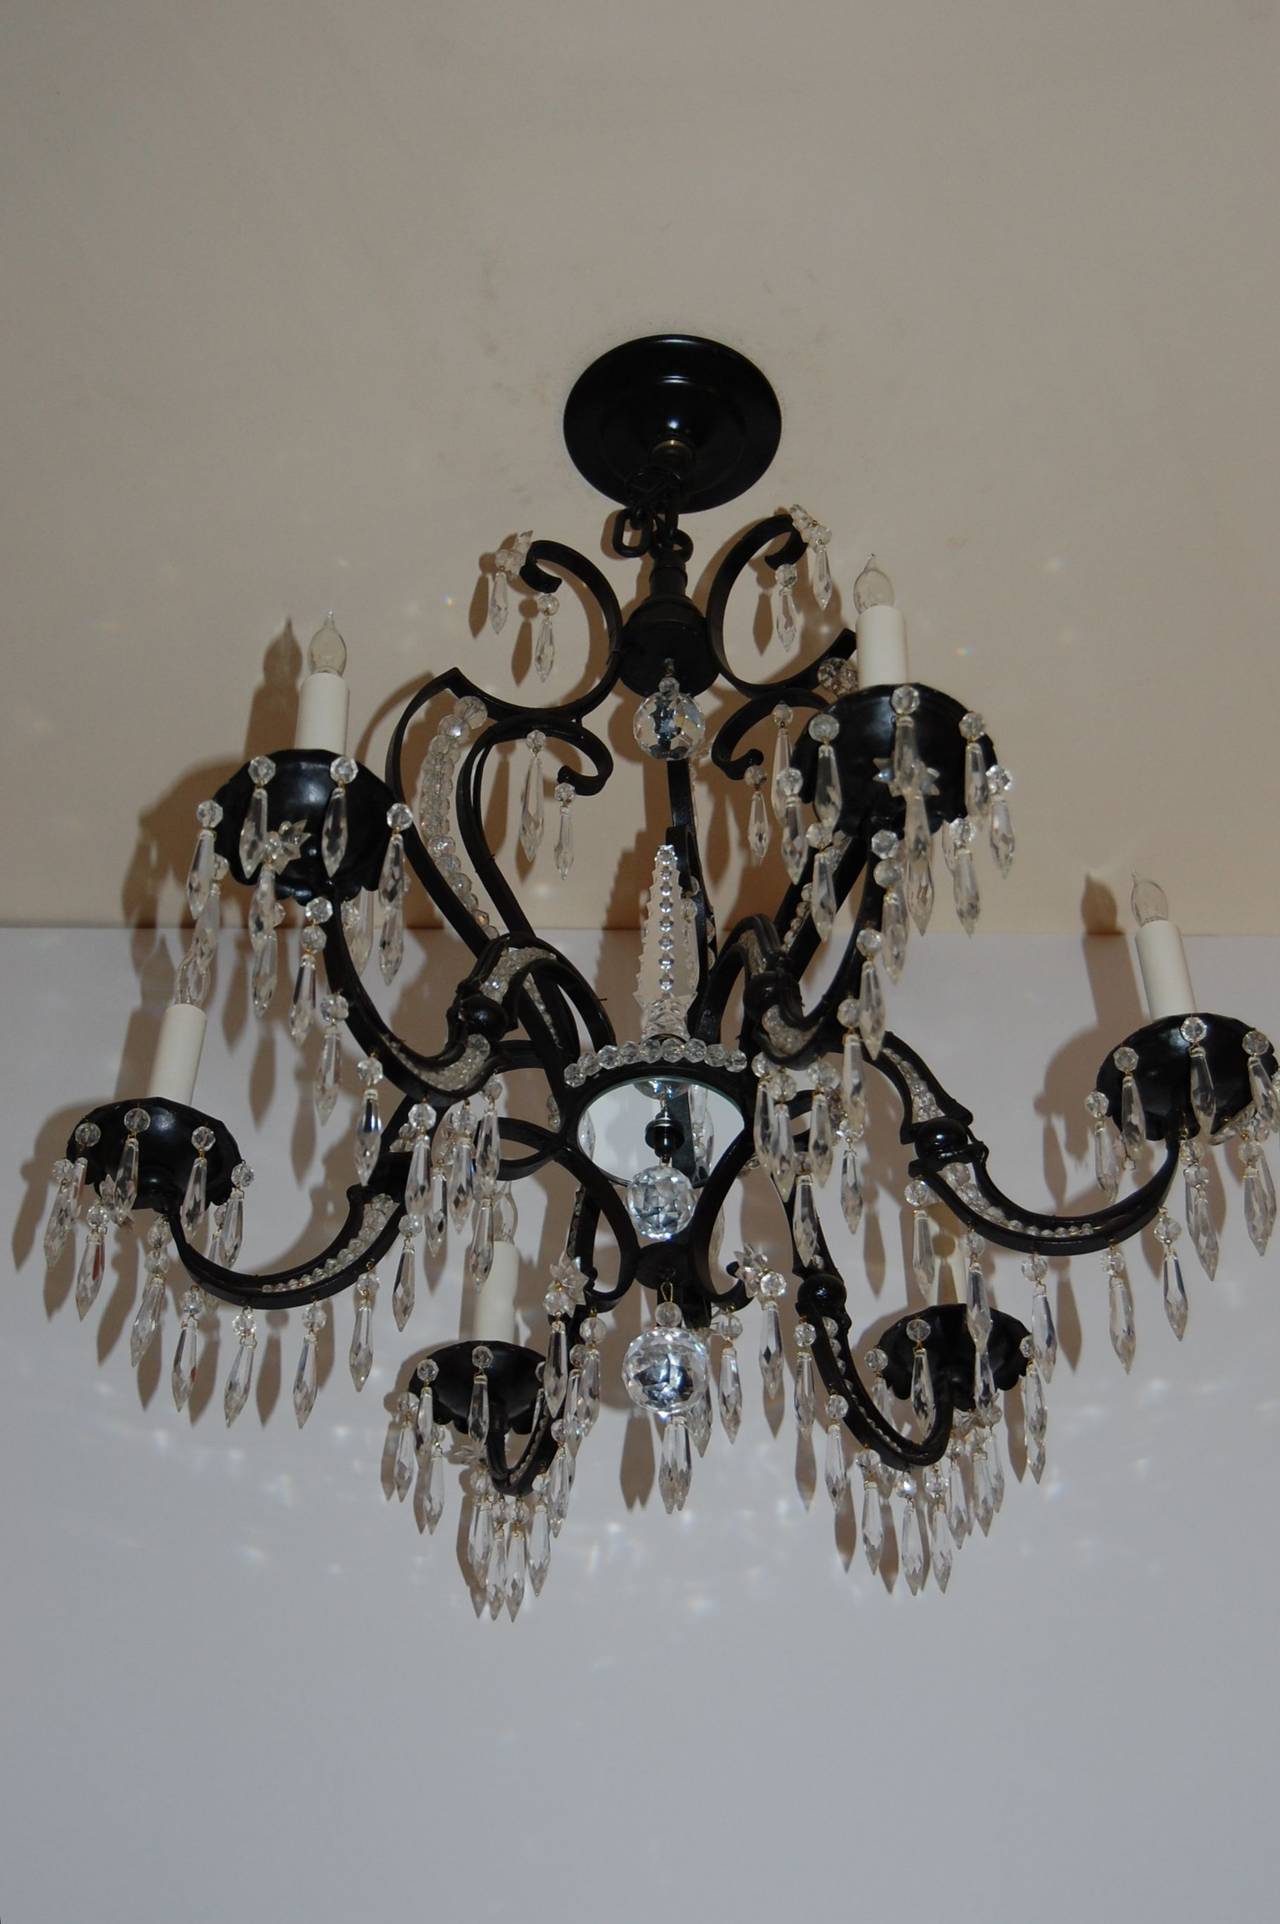 Iron 6 light chandelier with crystal drops and chains of cut crystal beads in a black painted finish, recently cleaned and rewired. The length of 25" does not include app. 6" of chain.